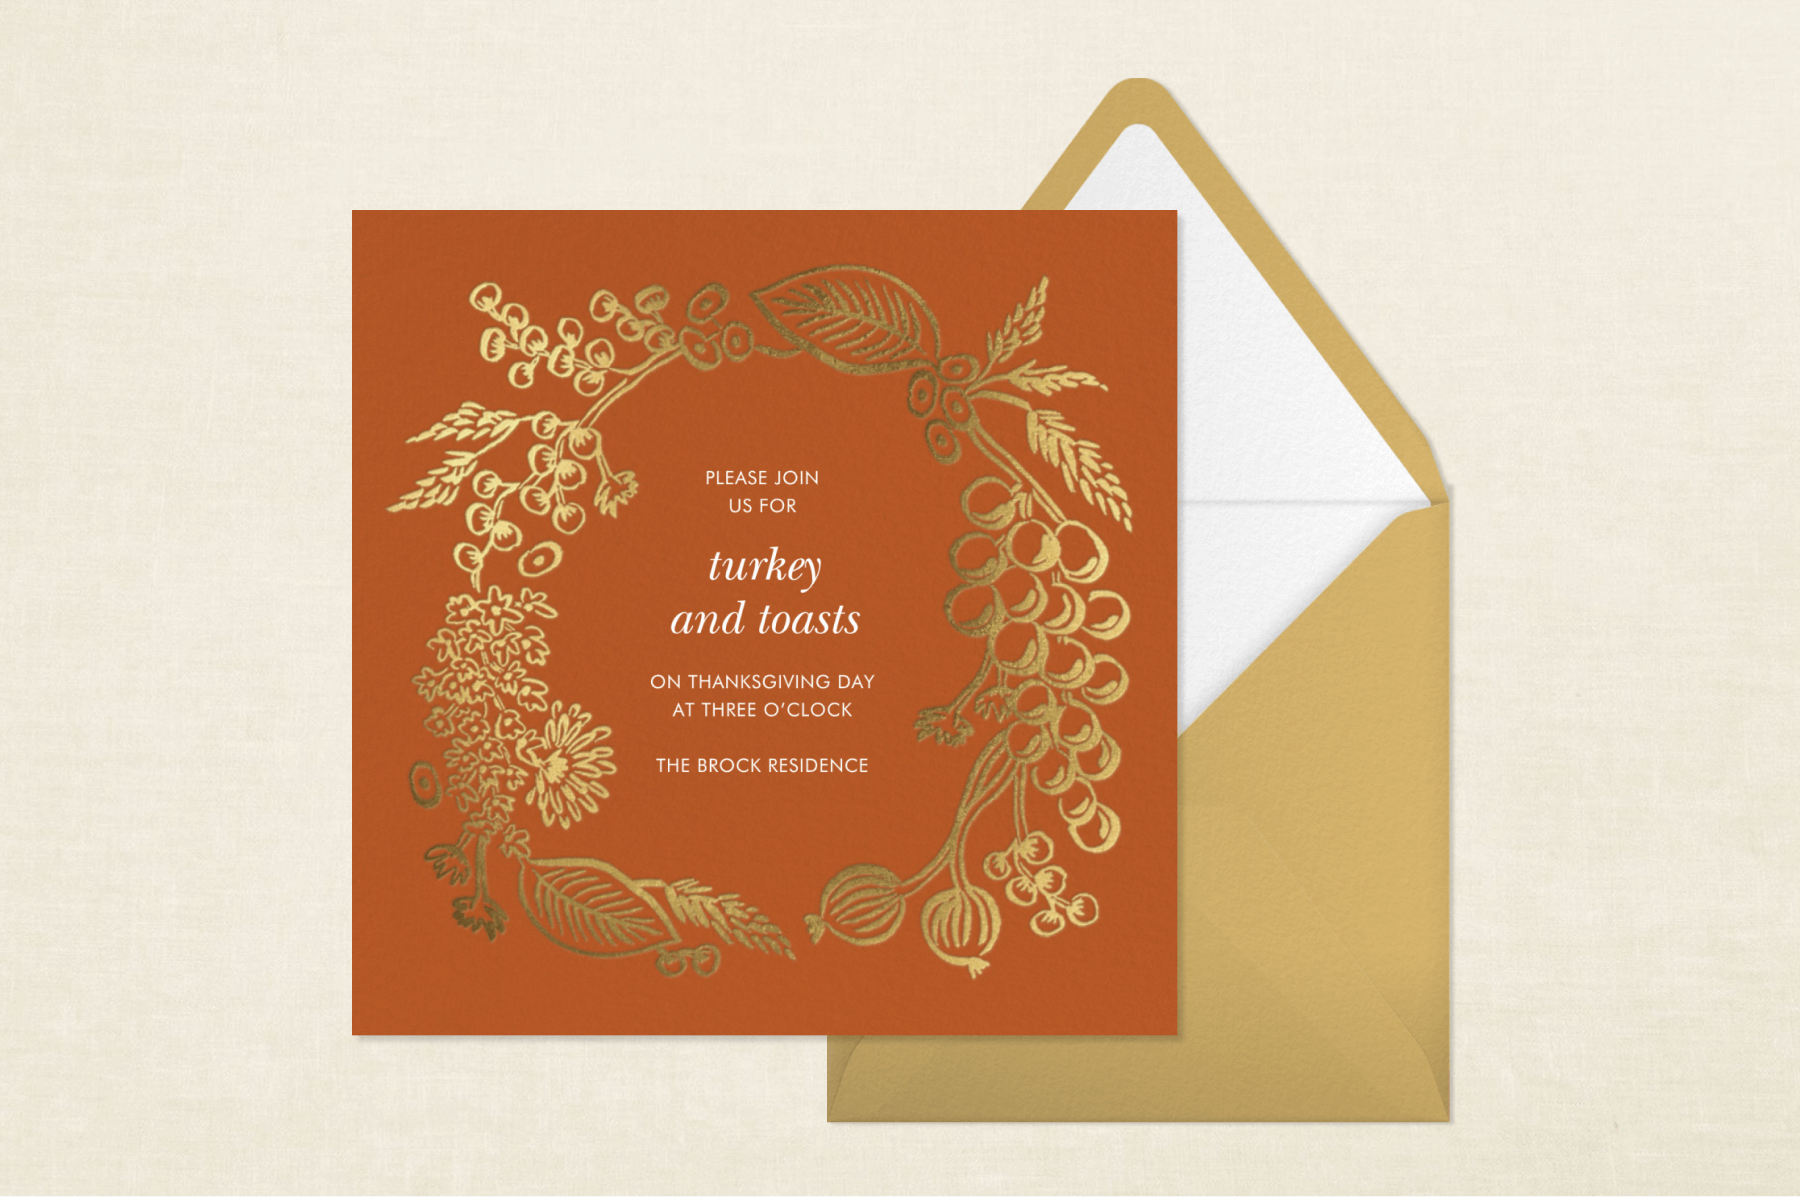 A russet-colored invitation for “turkey and toasts” with a gold berry border and gold envelope.